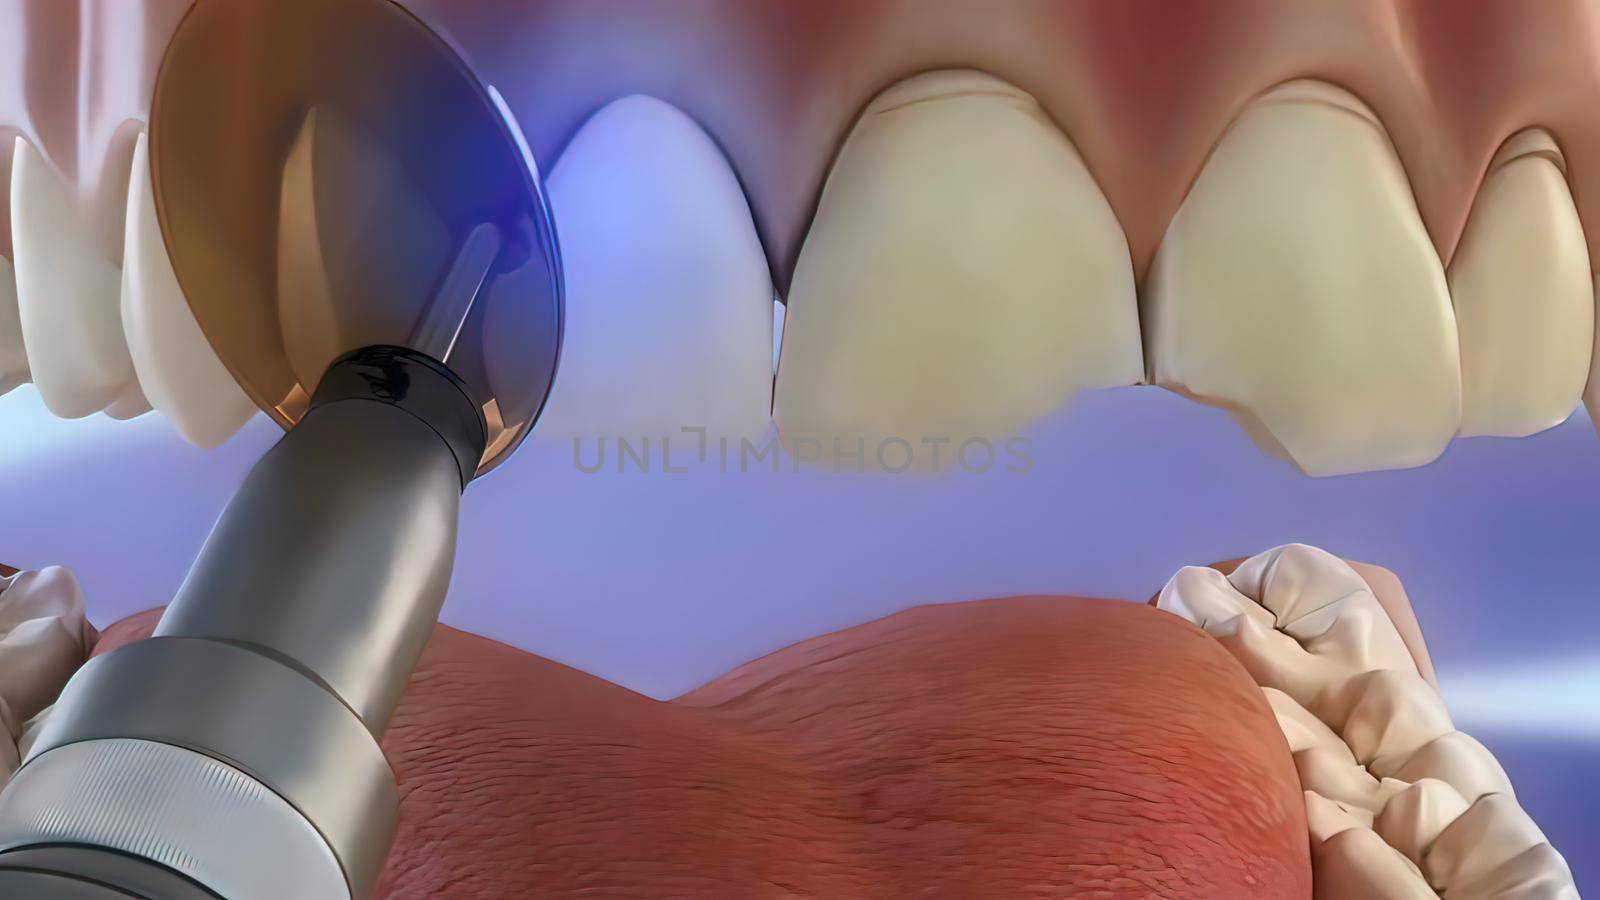 Tooth coating process, drying with adhesive beam 3D illustration